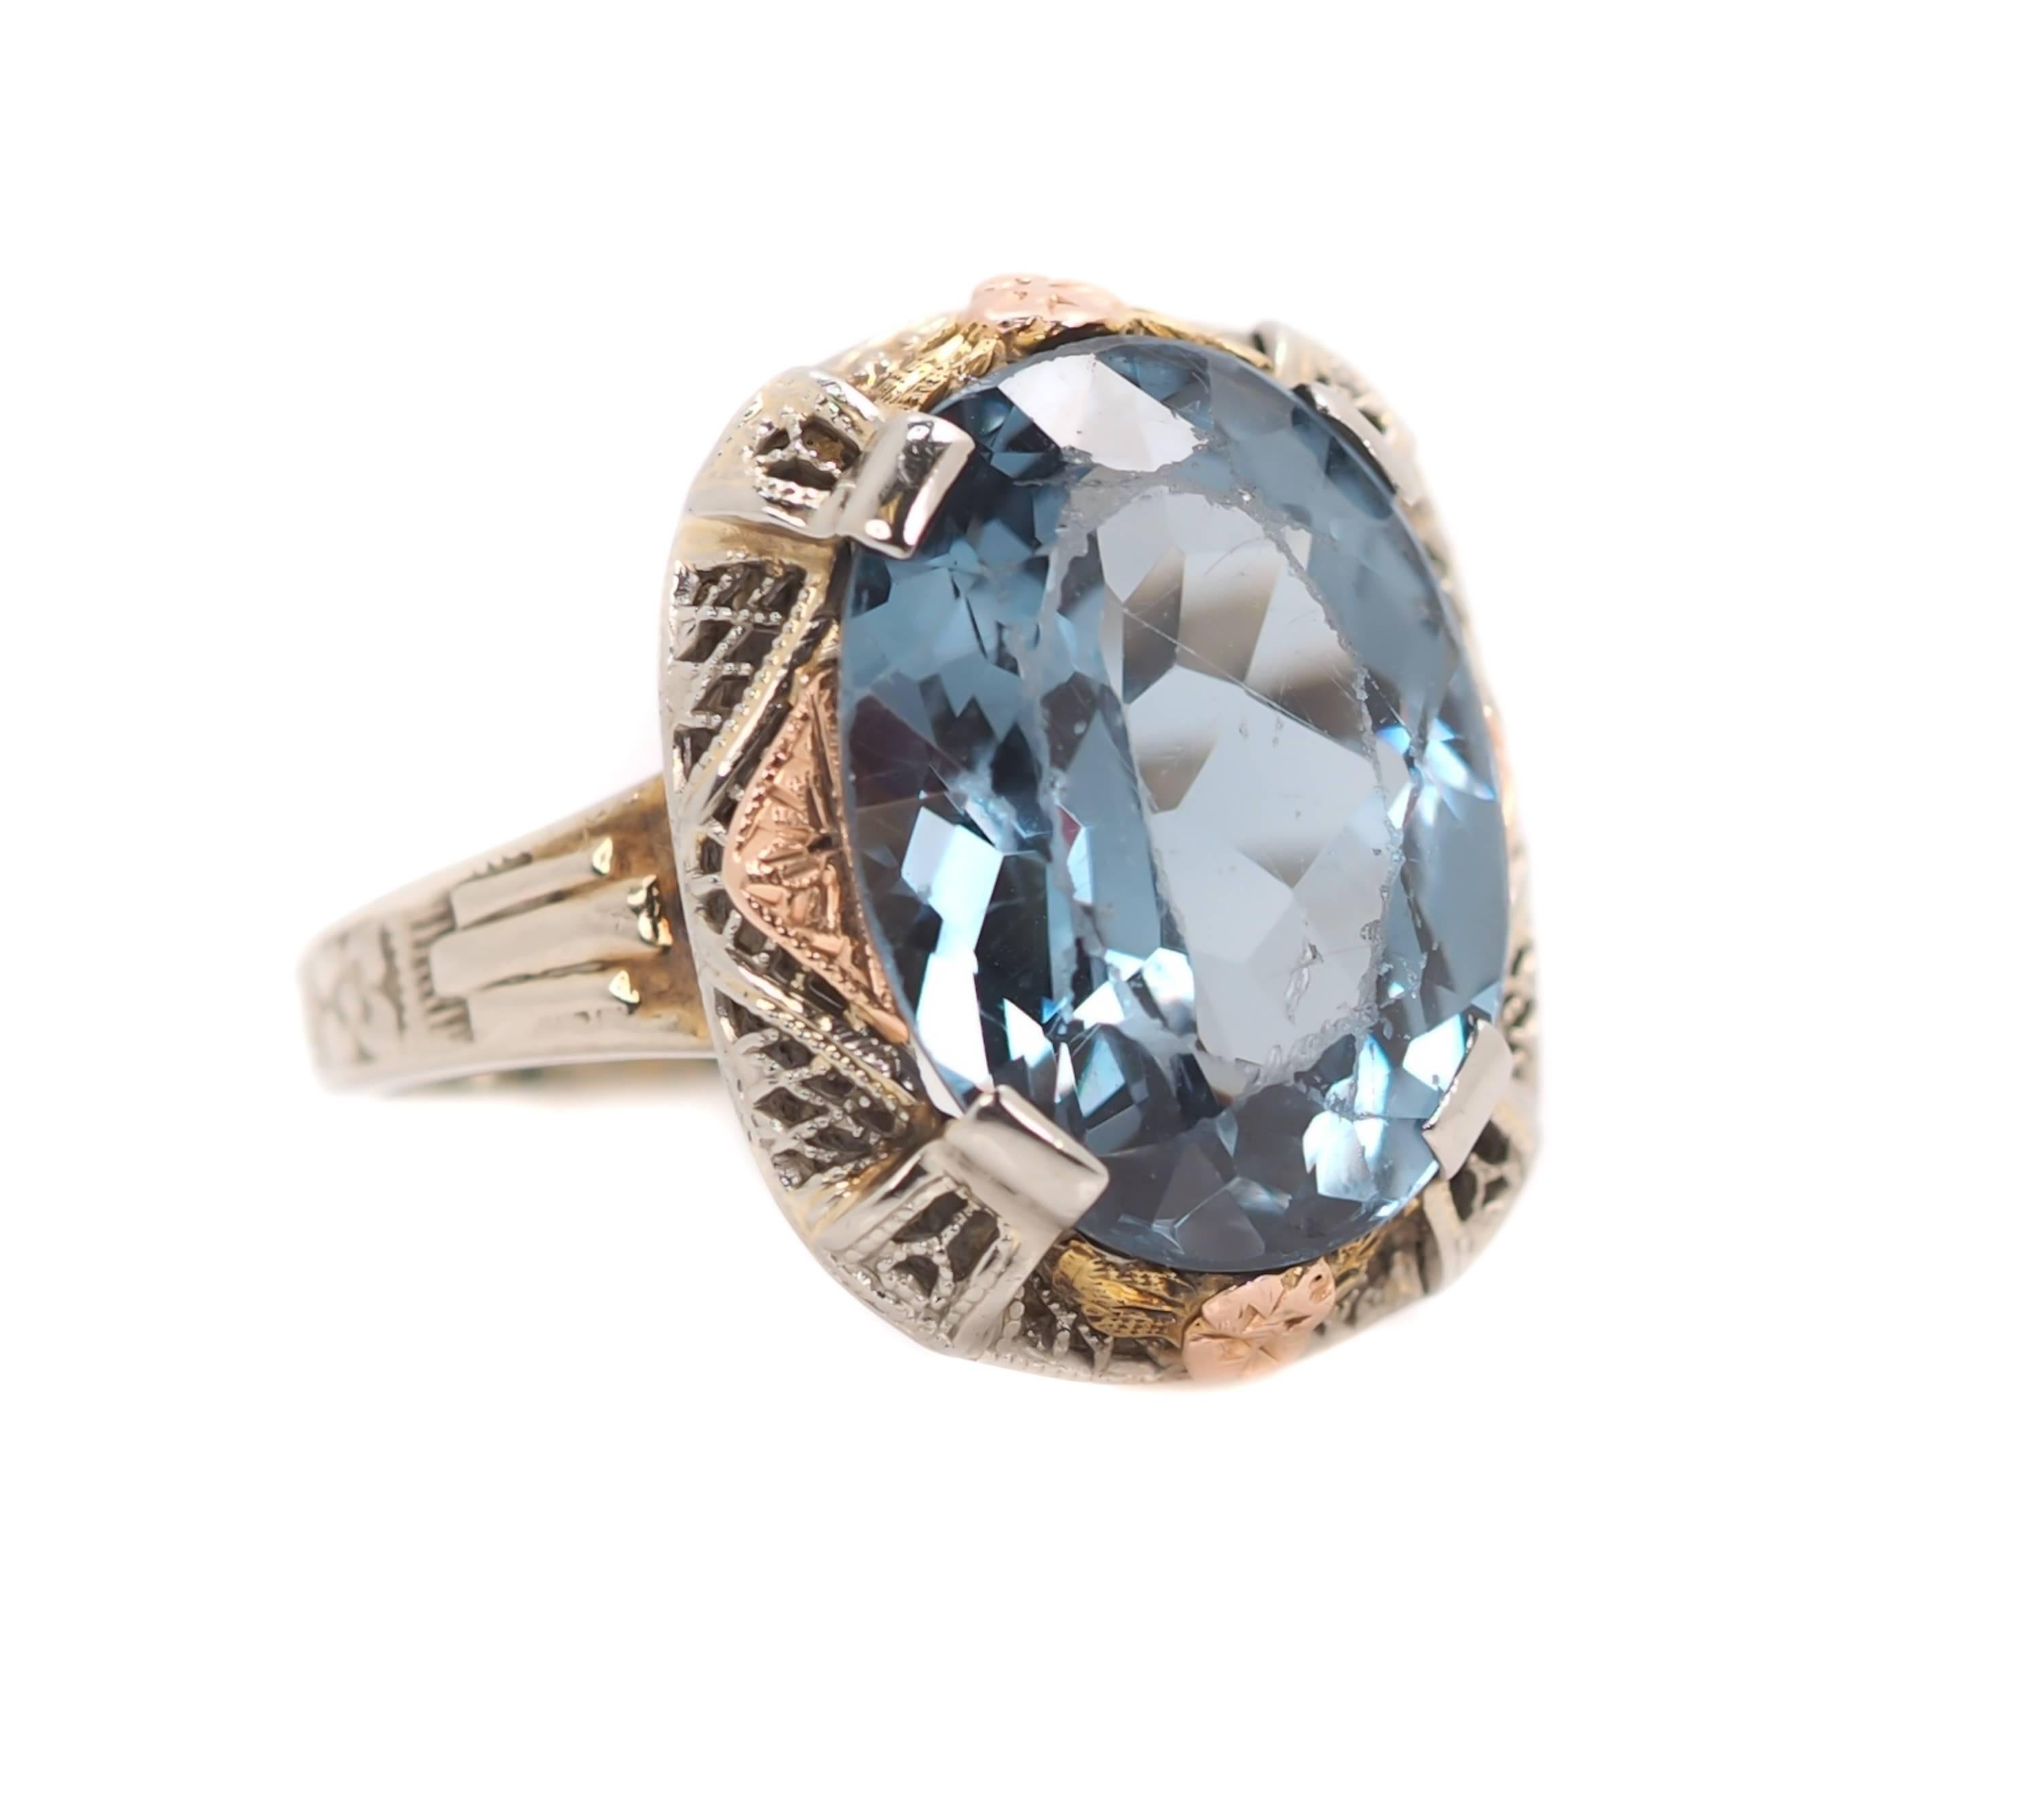 1930s Art Deco 14 Karat TriColor Gold and 5.0 Carat Blue Topaz Engagement Ring 

Features a faceted oval Ocean Blue Topaz center stone securely set with 4 prongs in a 14 karat white gold filigree mounting. The mounting has delicate 14 karat Rose